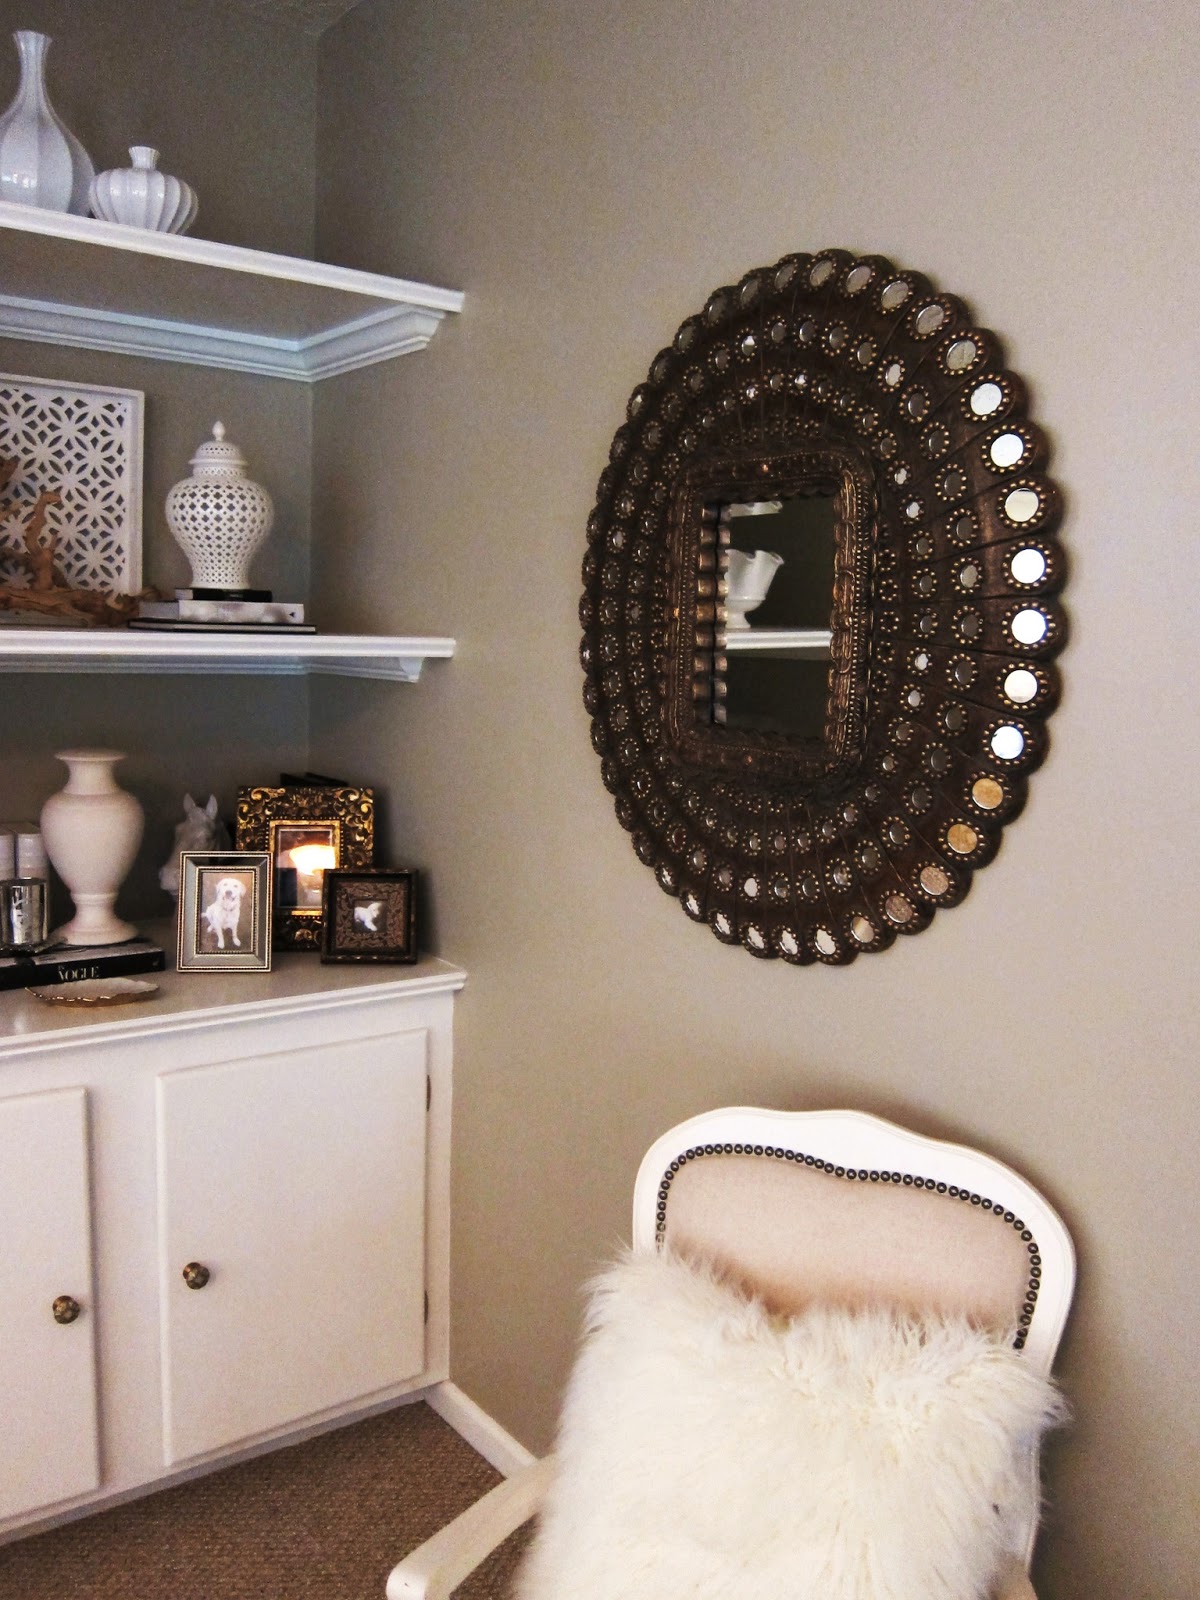 Makeupbytiffanyd Decorating With Mirrors And Mirrored Furniture